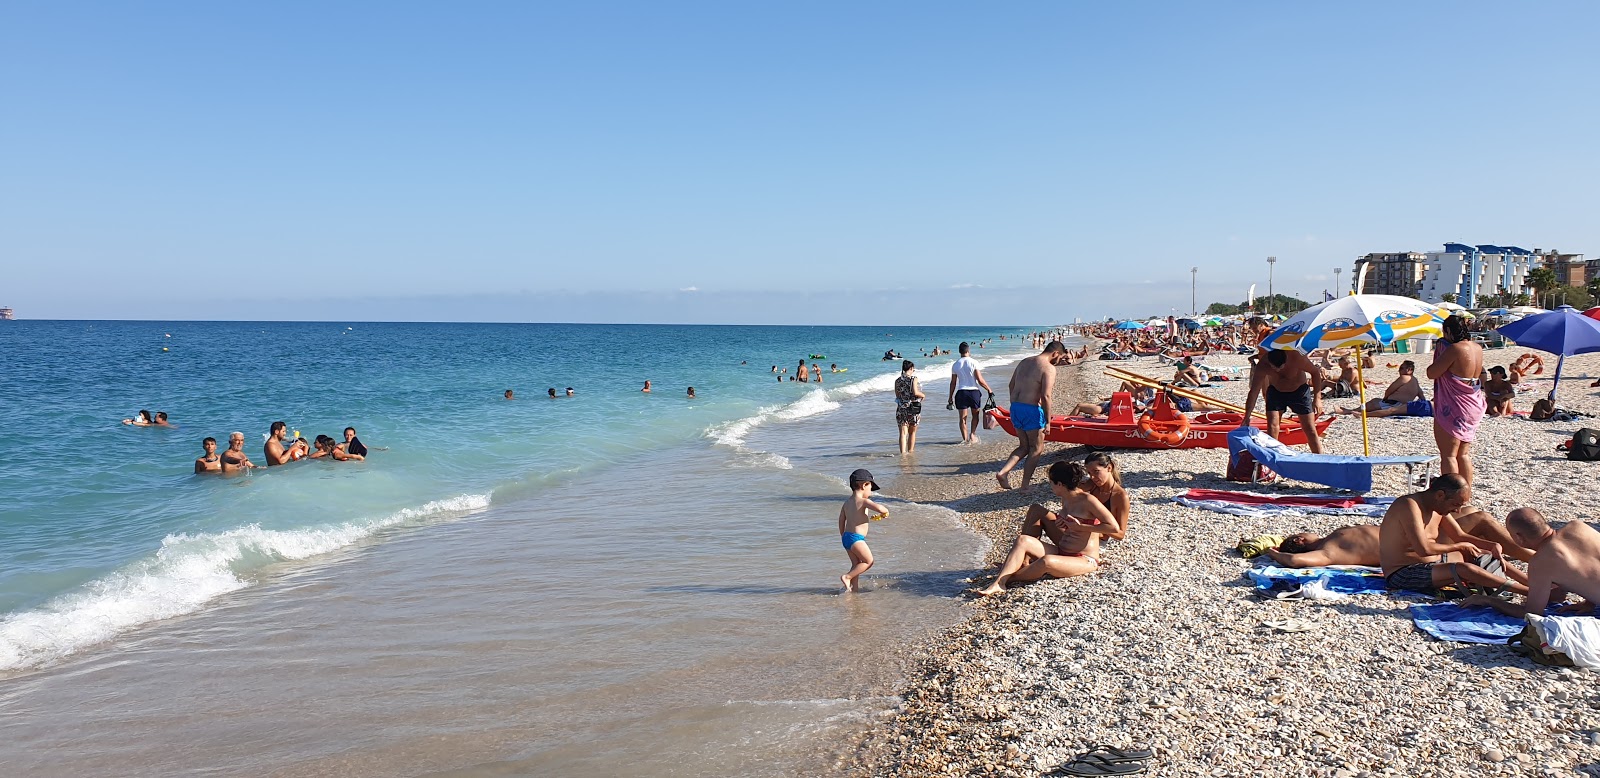 Photo of Civitanova Marche Sud - popular place among relax connoisseurs